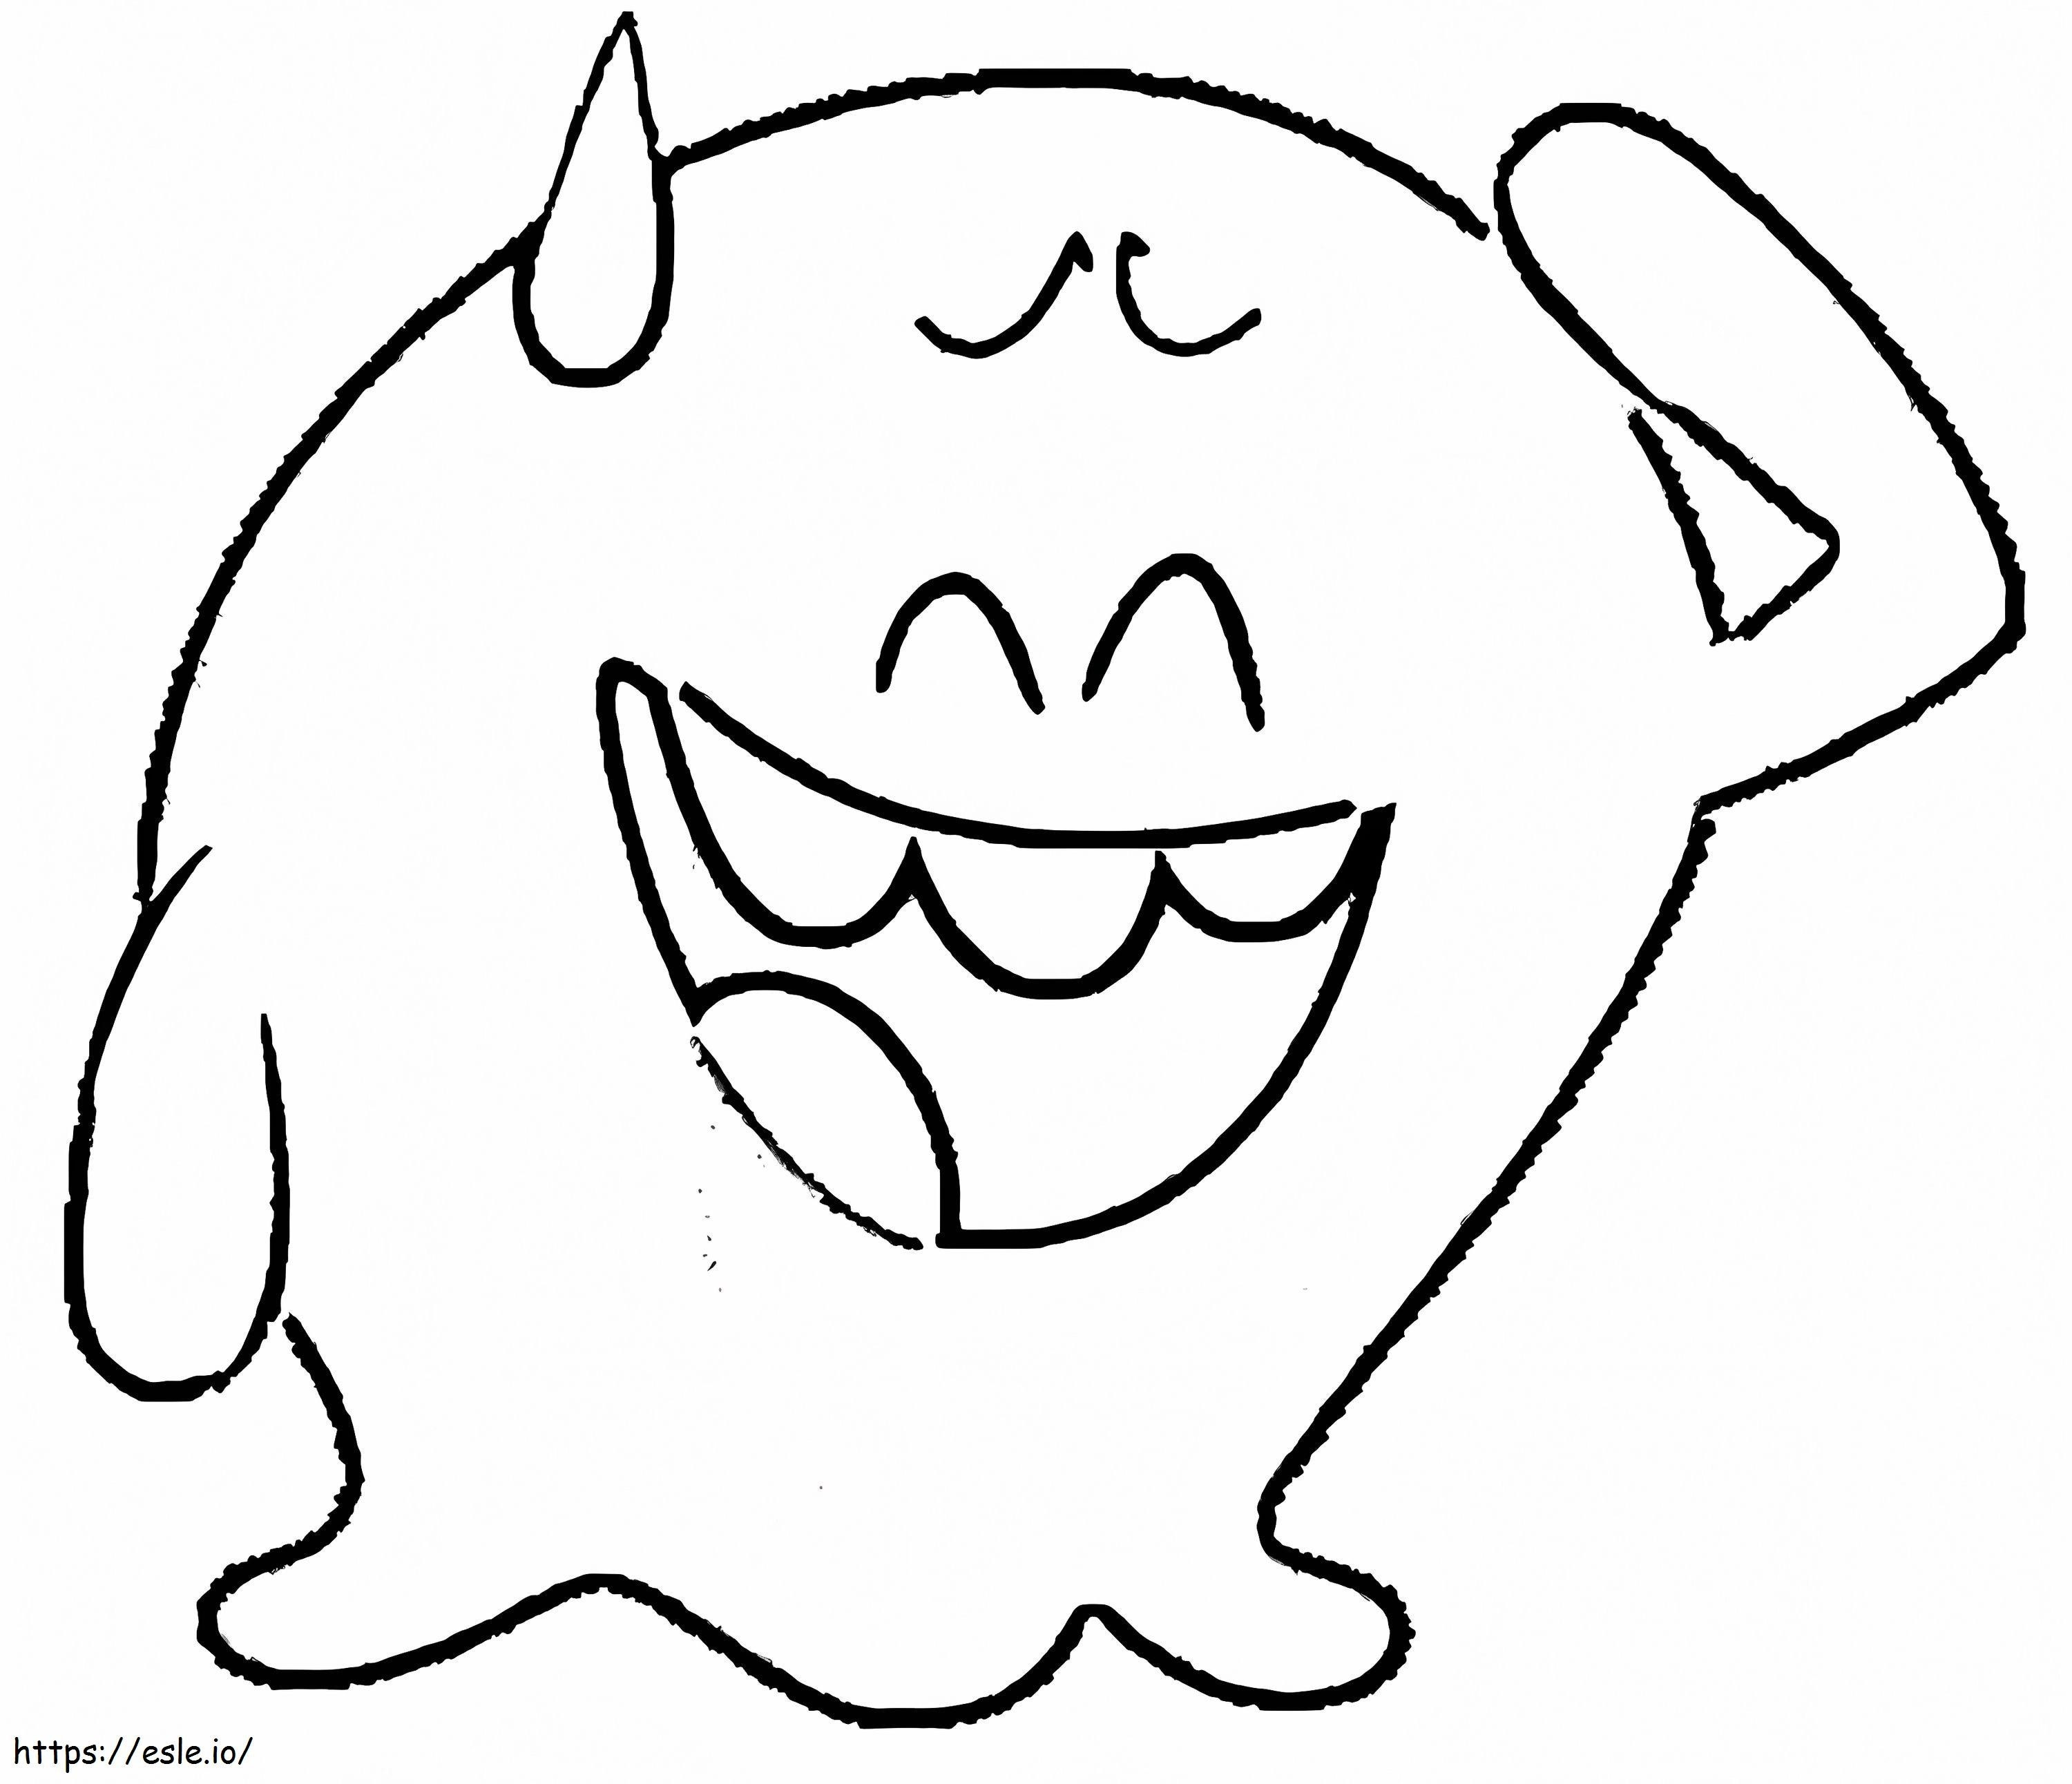 Lamput Laughing coloring page